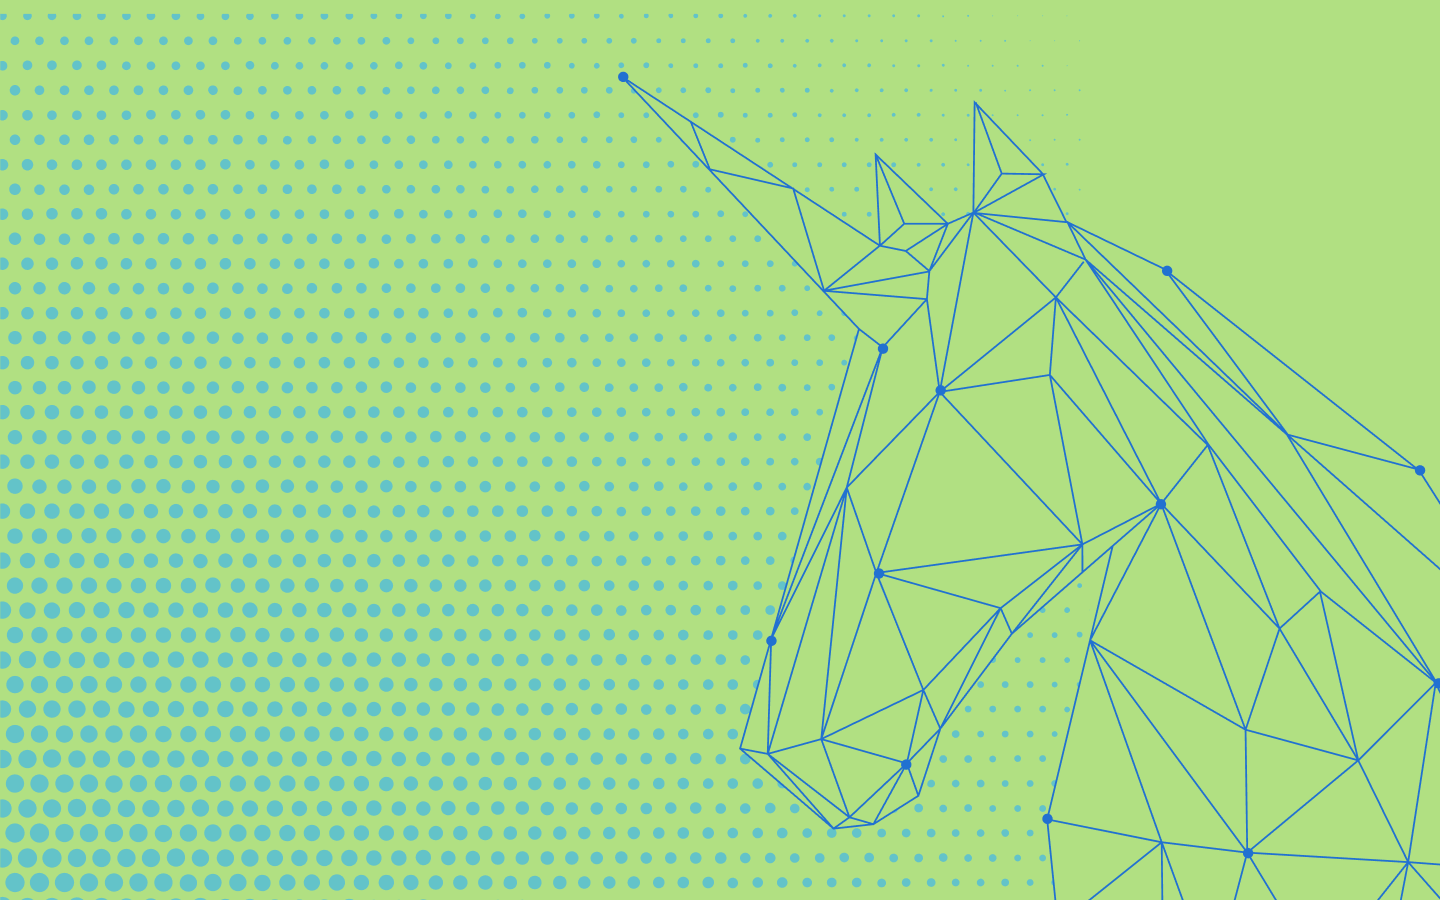 Prismatic blue unicorn on green and blue dot background.